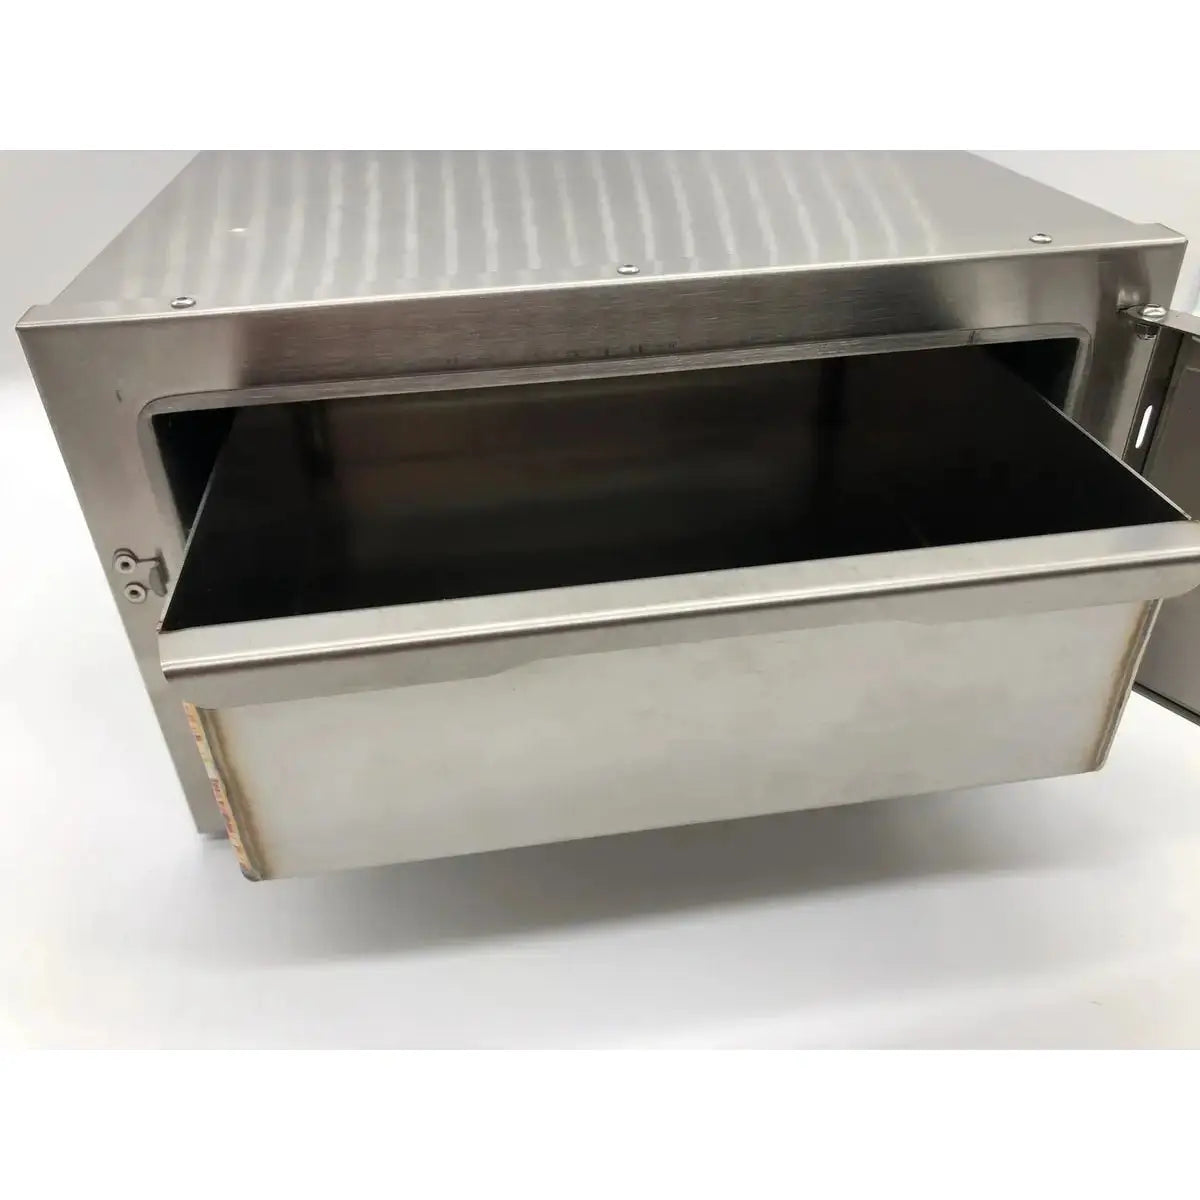 Full Height Oven Tray to suit Road Chef, KickAss & Tentworld Outback Ovens - AMD Touring